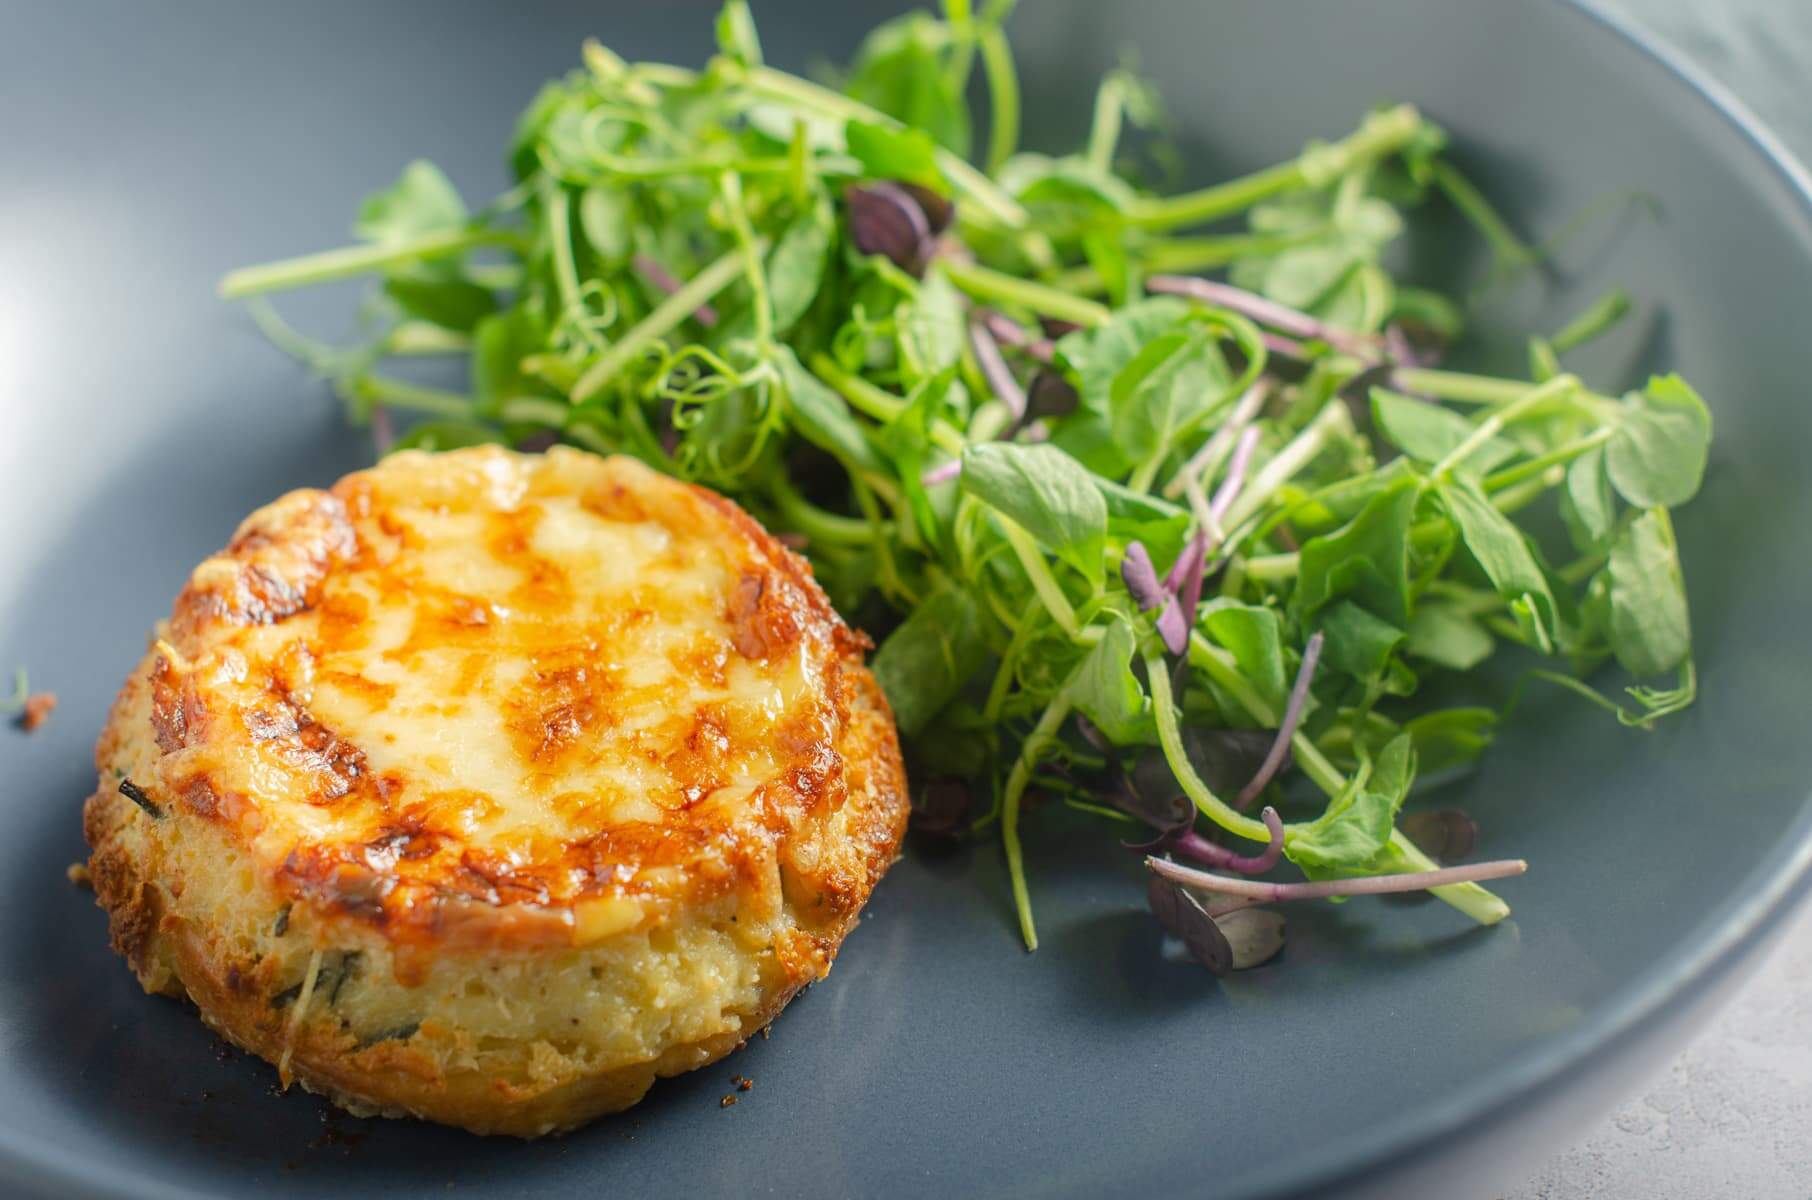 A twice baked cheese souffle fresh from the oven served on a dark blue plate with a green salad.